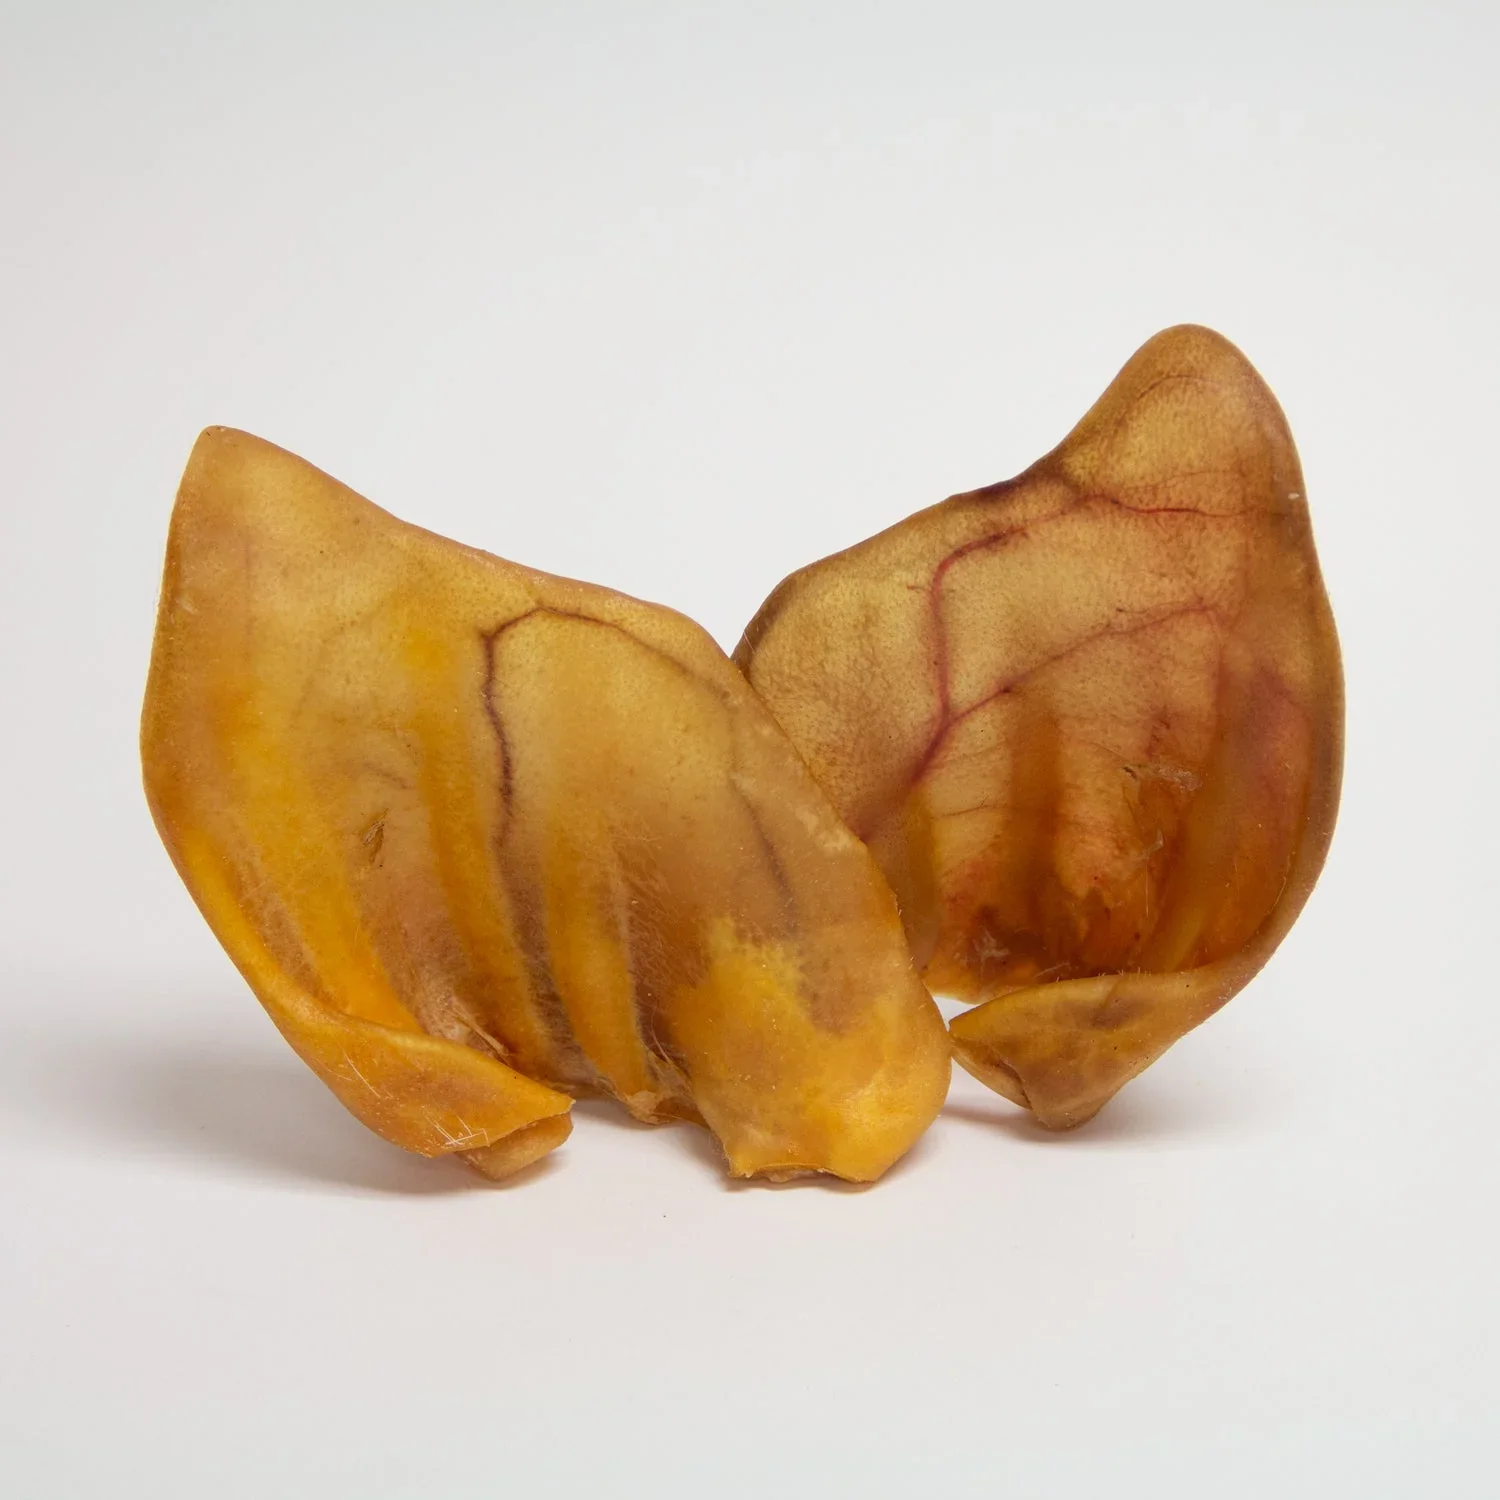 Image of Pig Ears For dogs